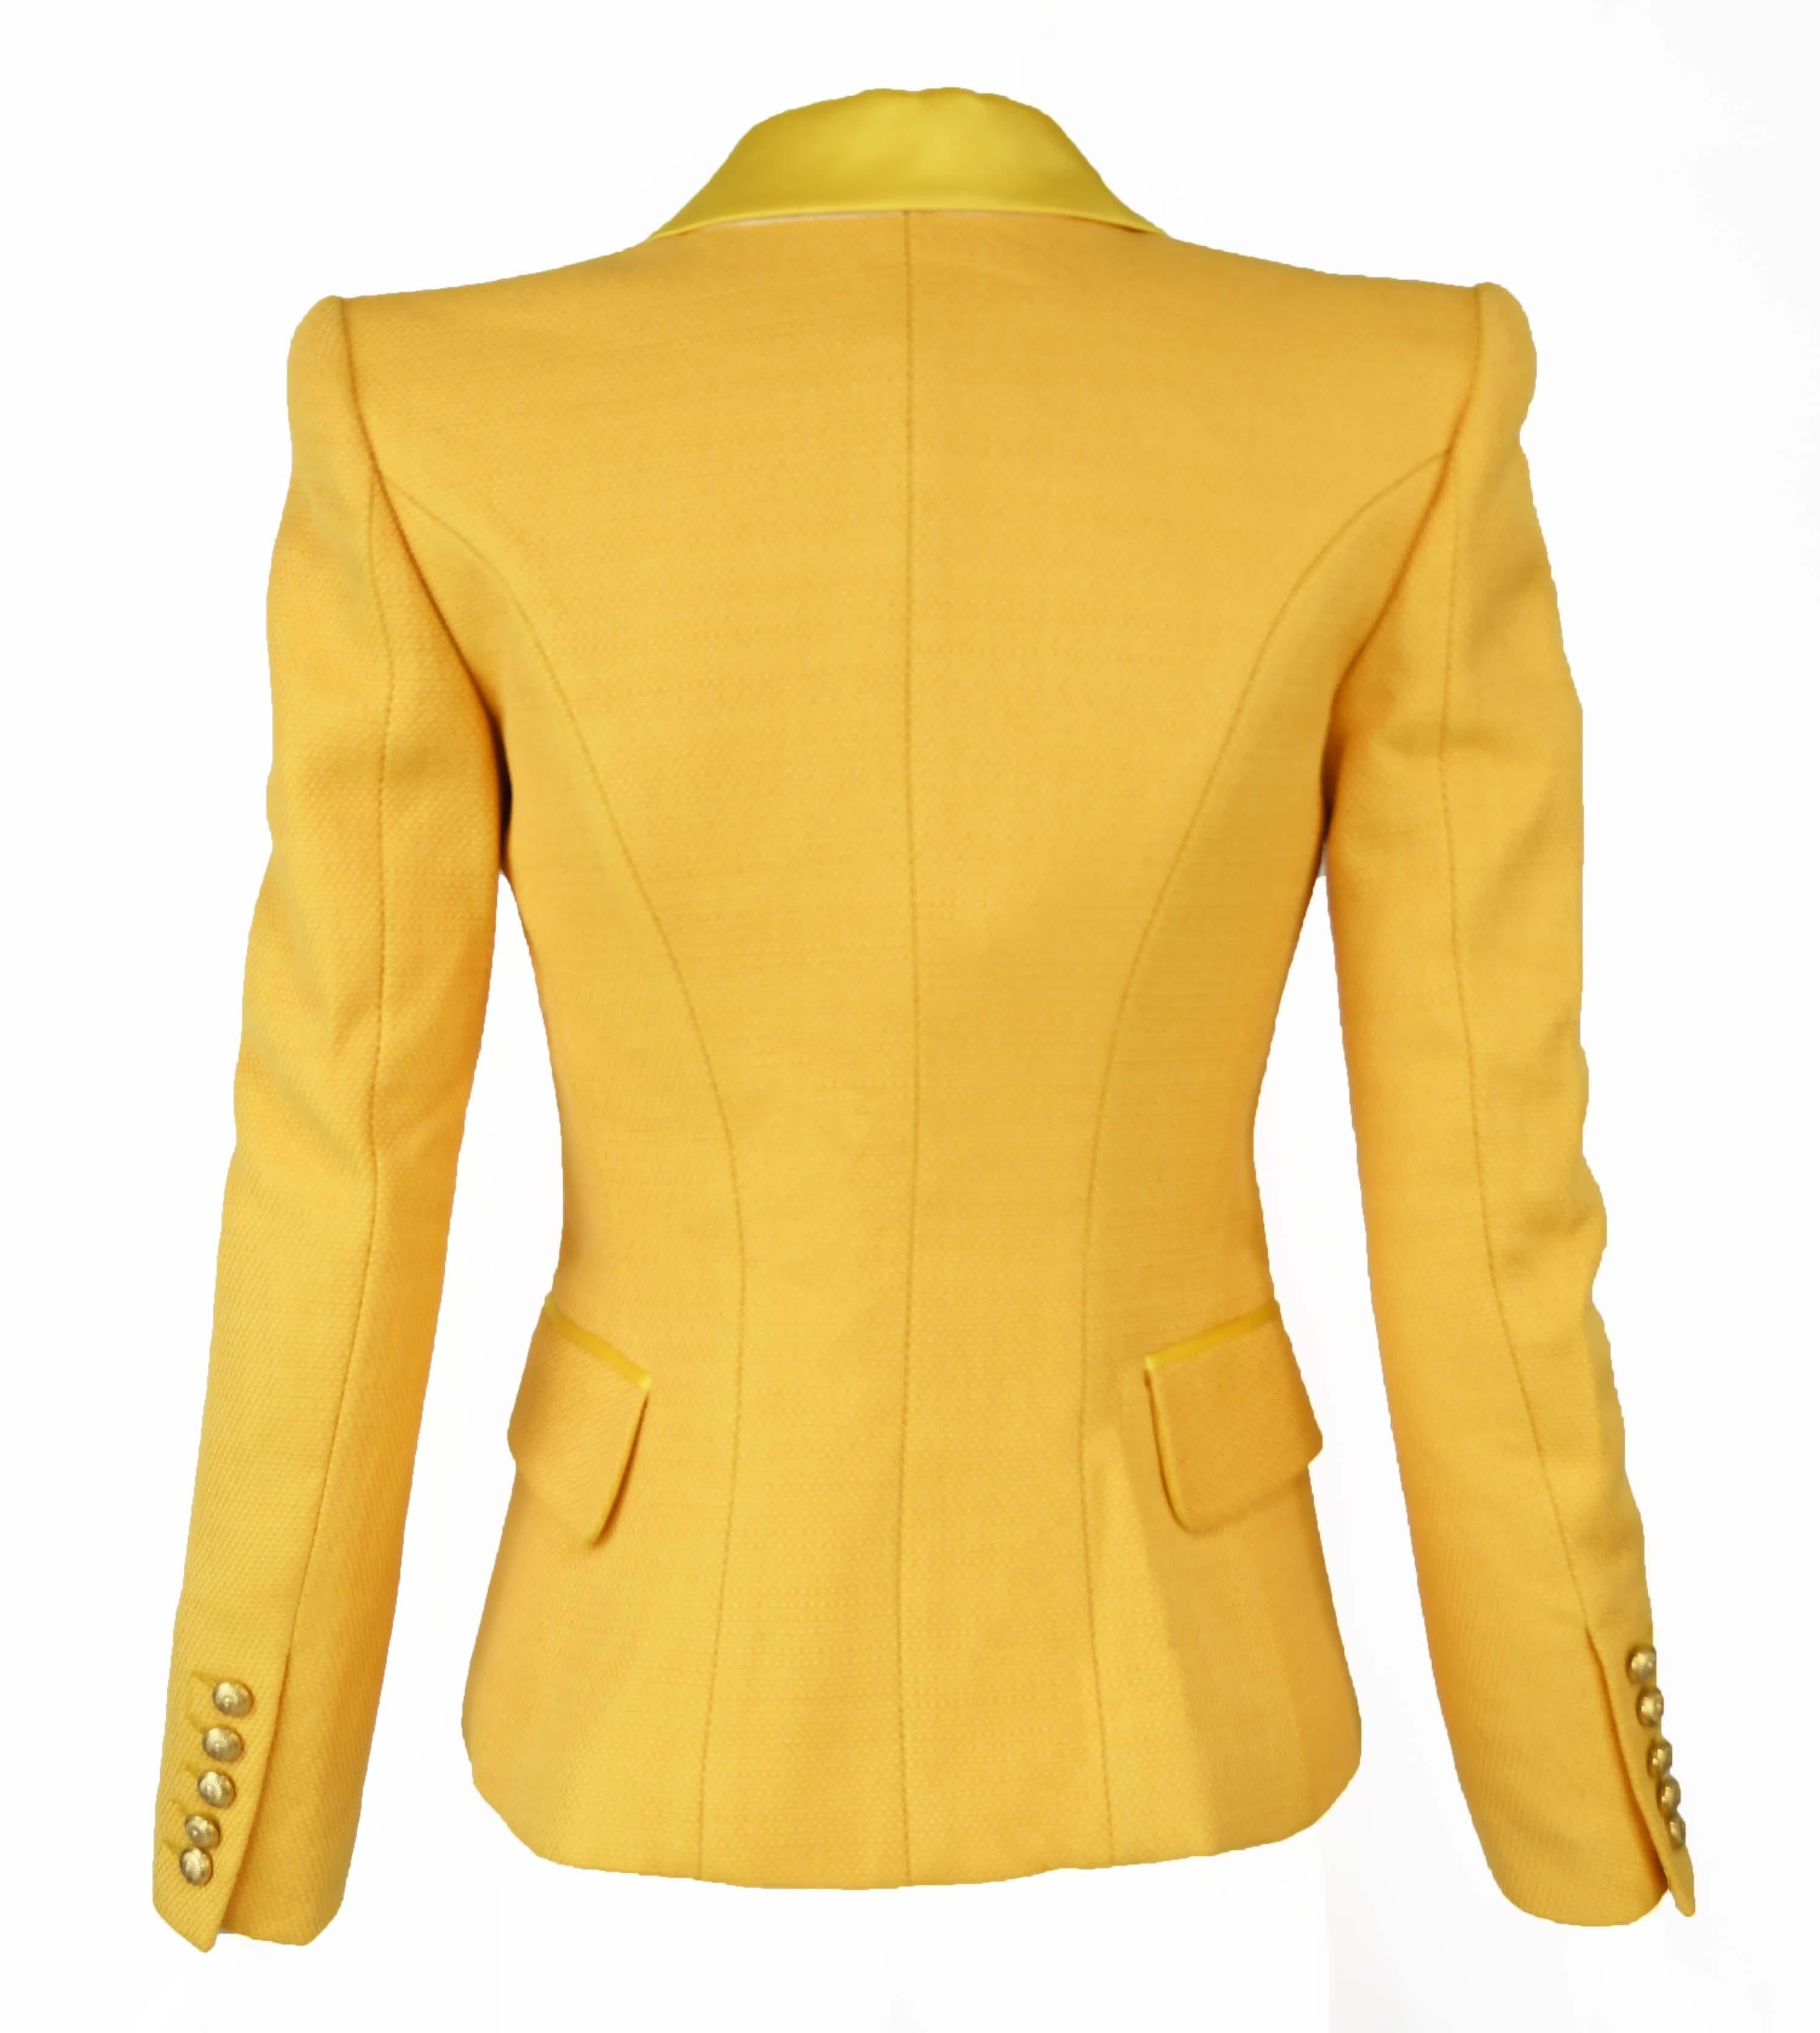 Balmain Yellow Pique Blazer with Satin Collar - Sizes FR 34 & 36 In New Condition For Sale In Newport, RI